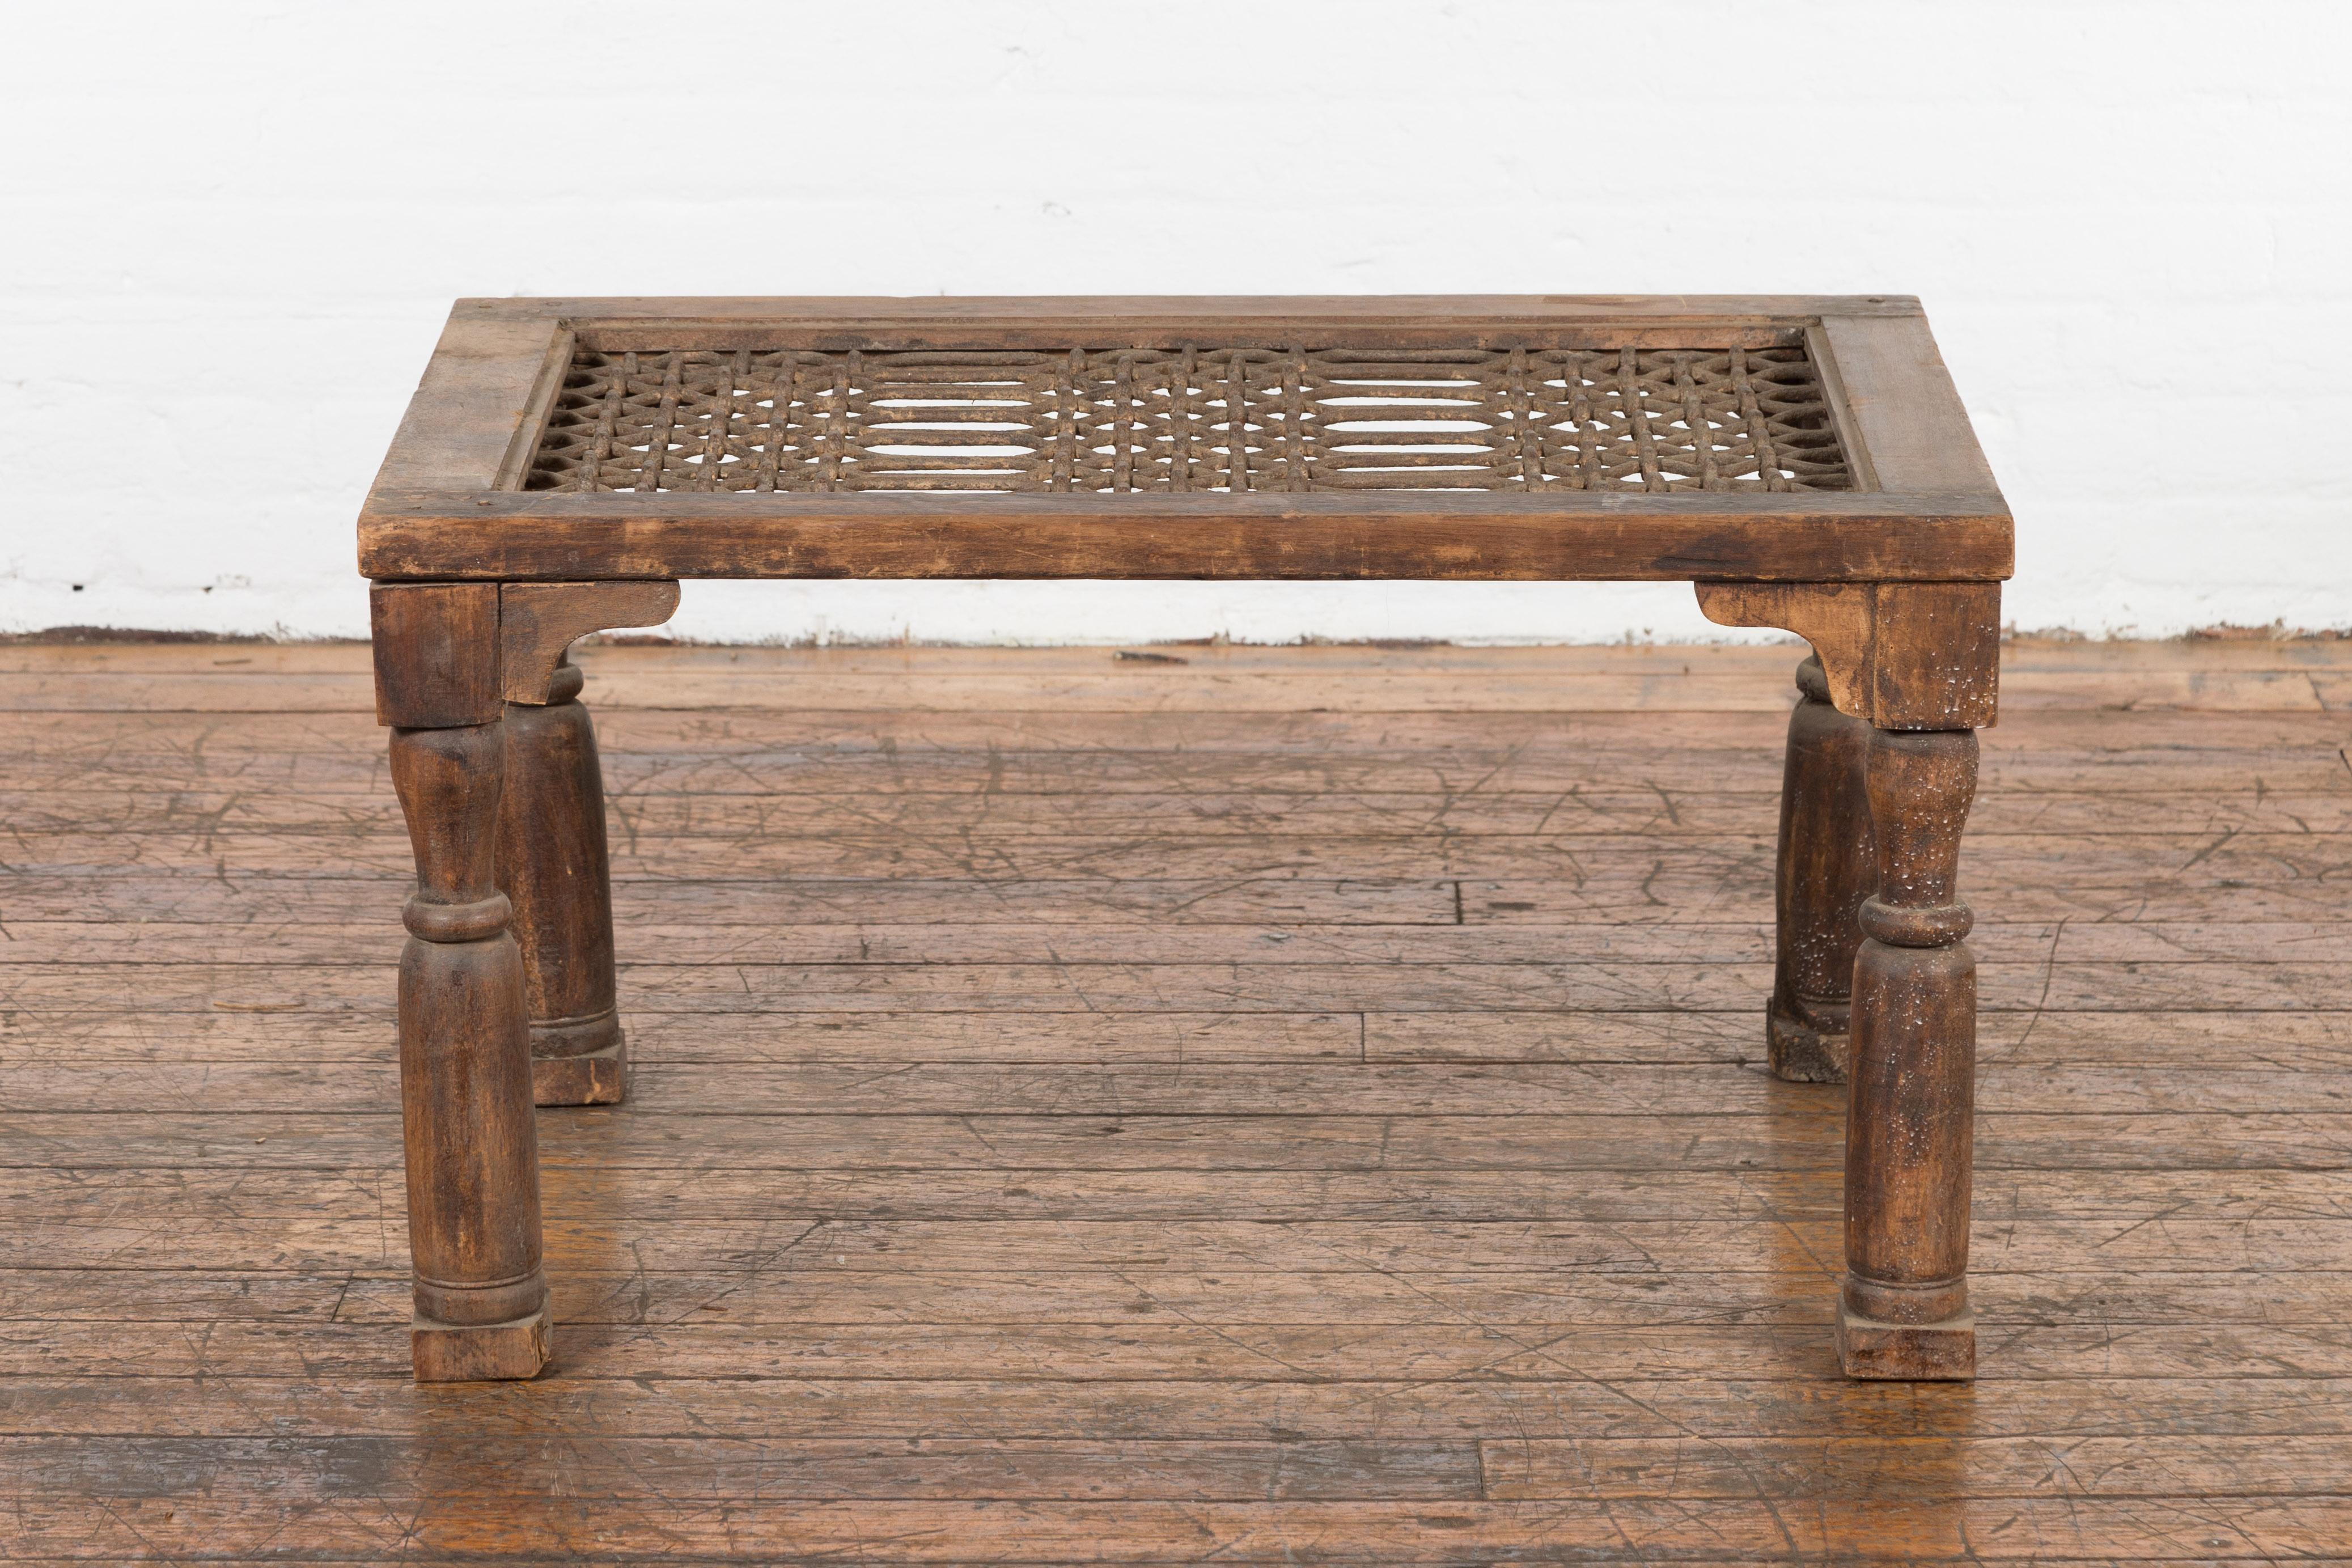 An antique rustic Indian window grate from the 19th century, made into a coffee table with baluster legs and weathered appearance. We have more assorted sizes available, please contact us with any questions. Created in India during the 19th century,